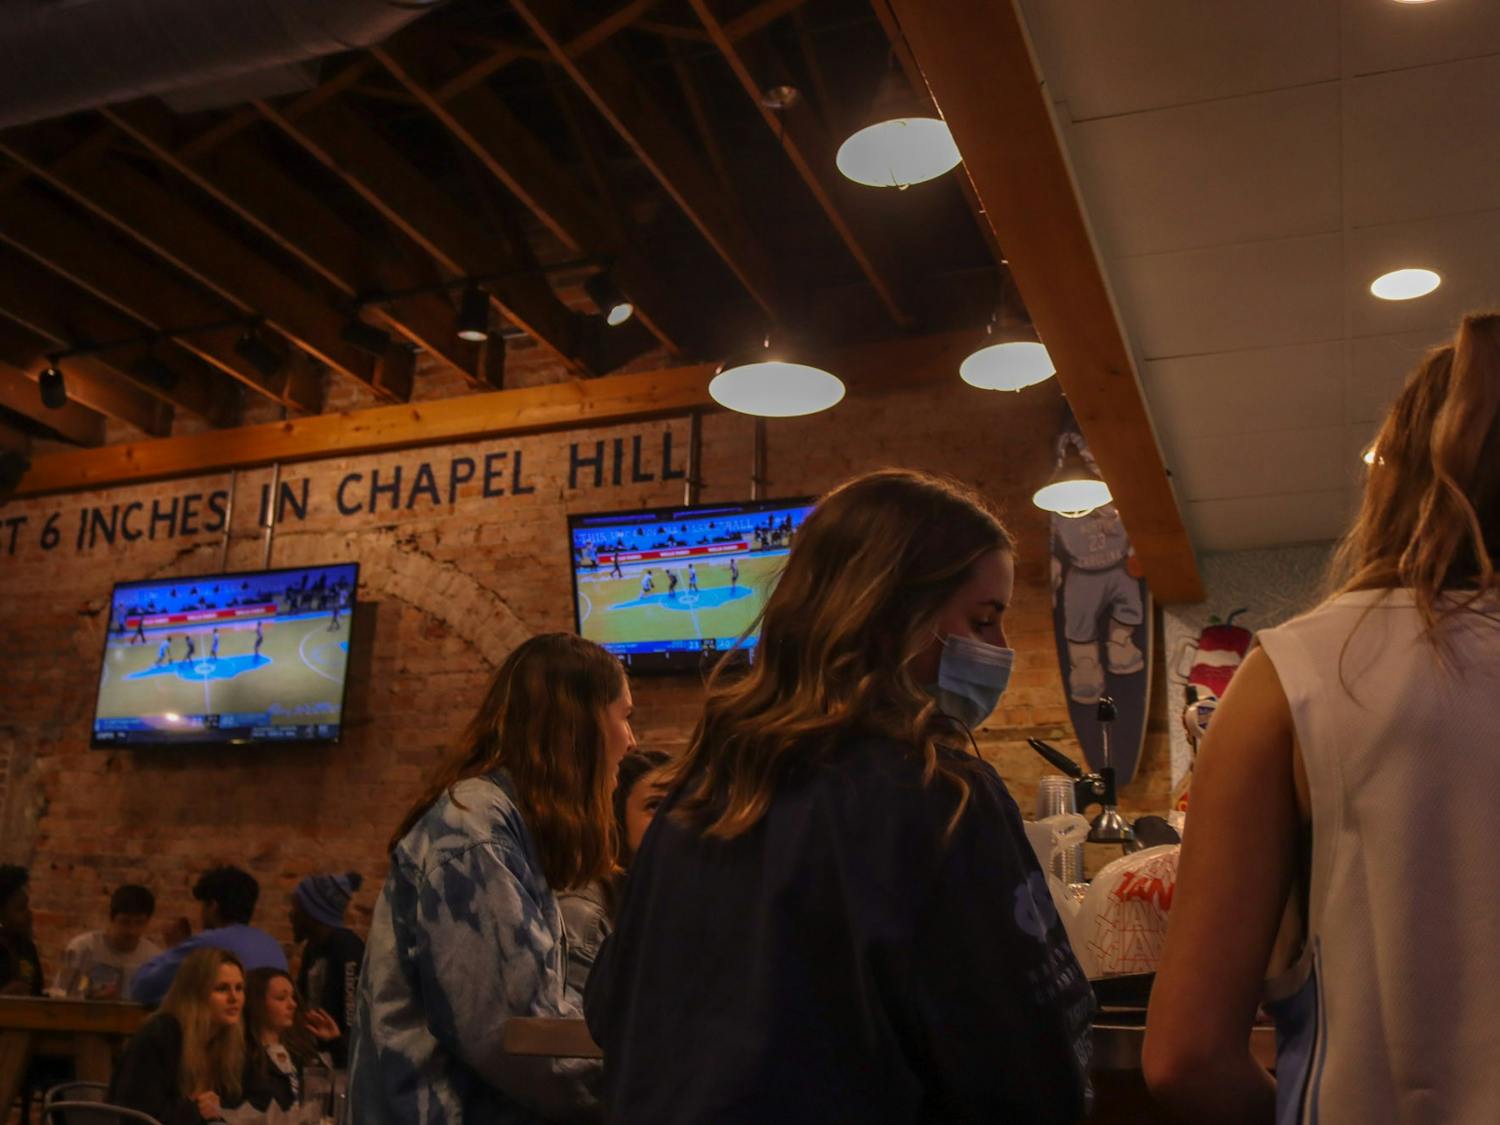 Students gather in Sup Dogs on Franklin Street to watch UNC's 91-73 defeat of Duke basketball on March 6, 2021.